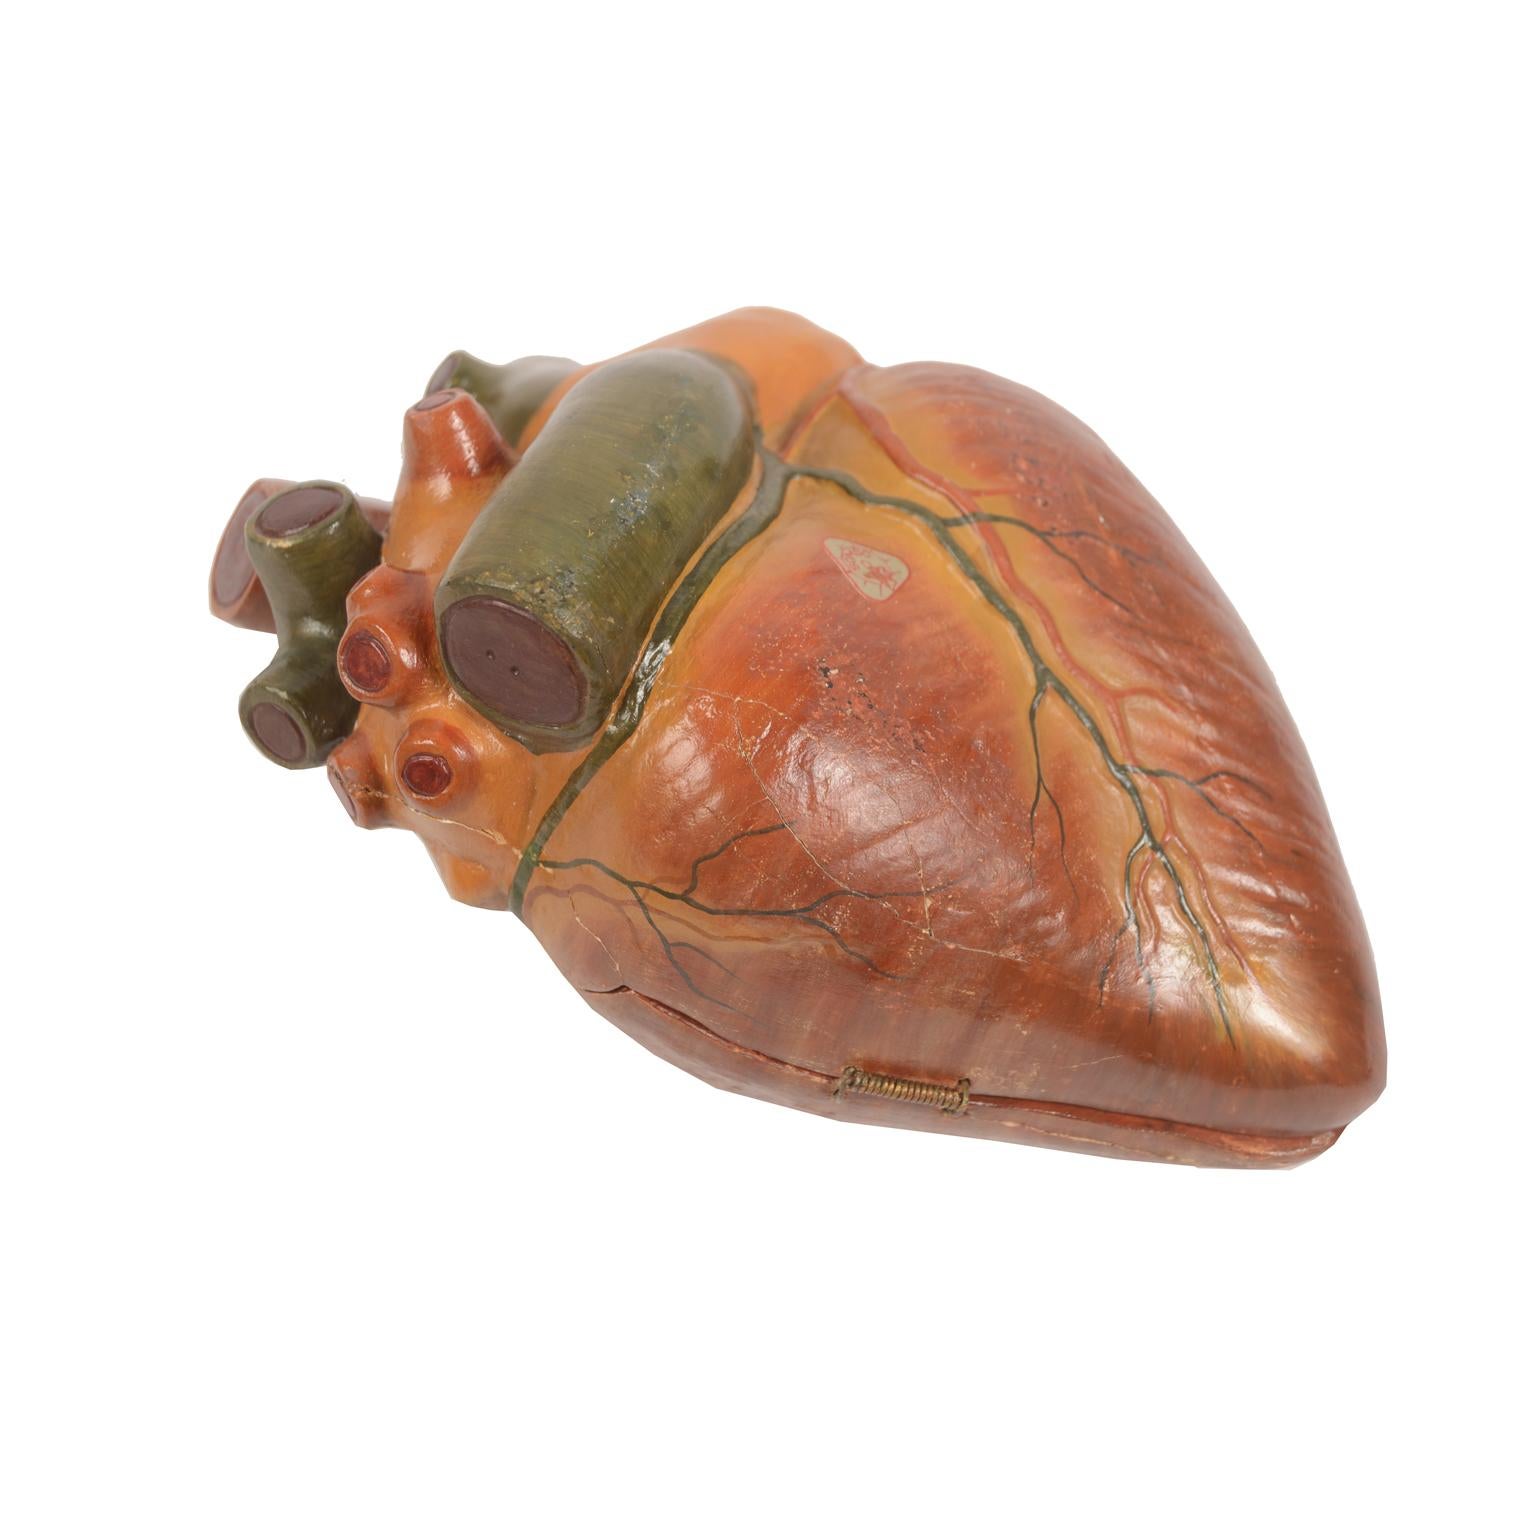 Mid-20th Century 1930s Plaster Medical Didactic Anatomical Model of A Human Heart, Germany 